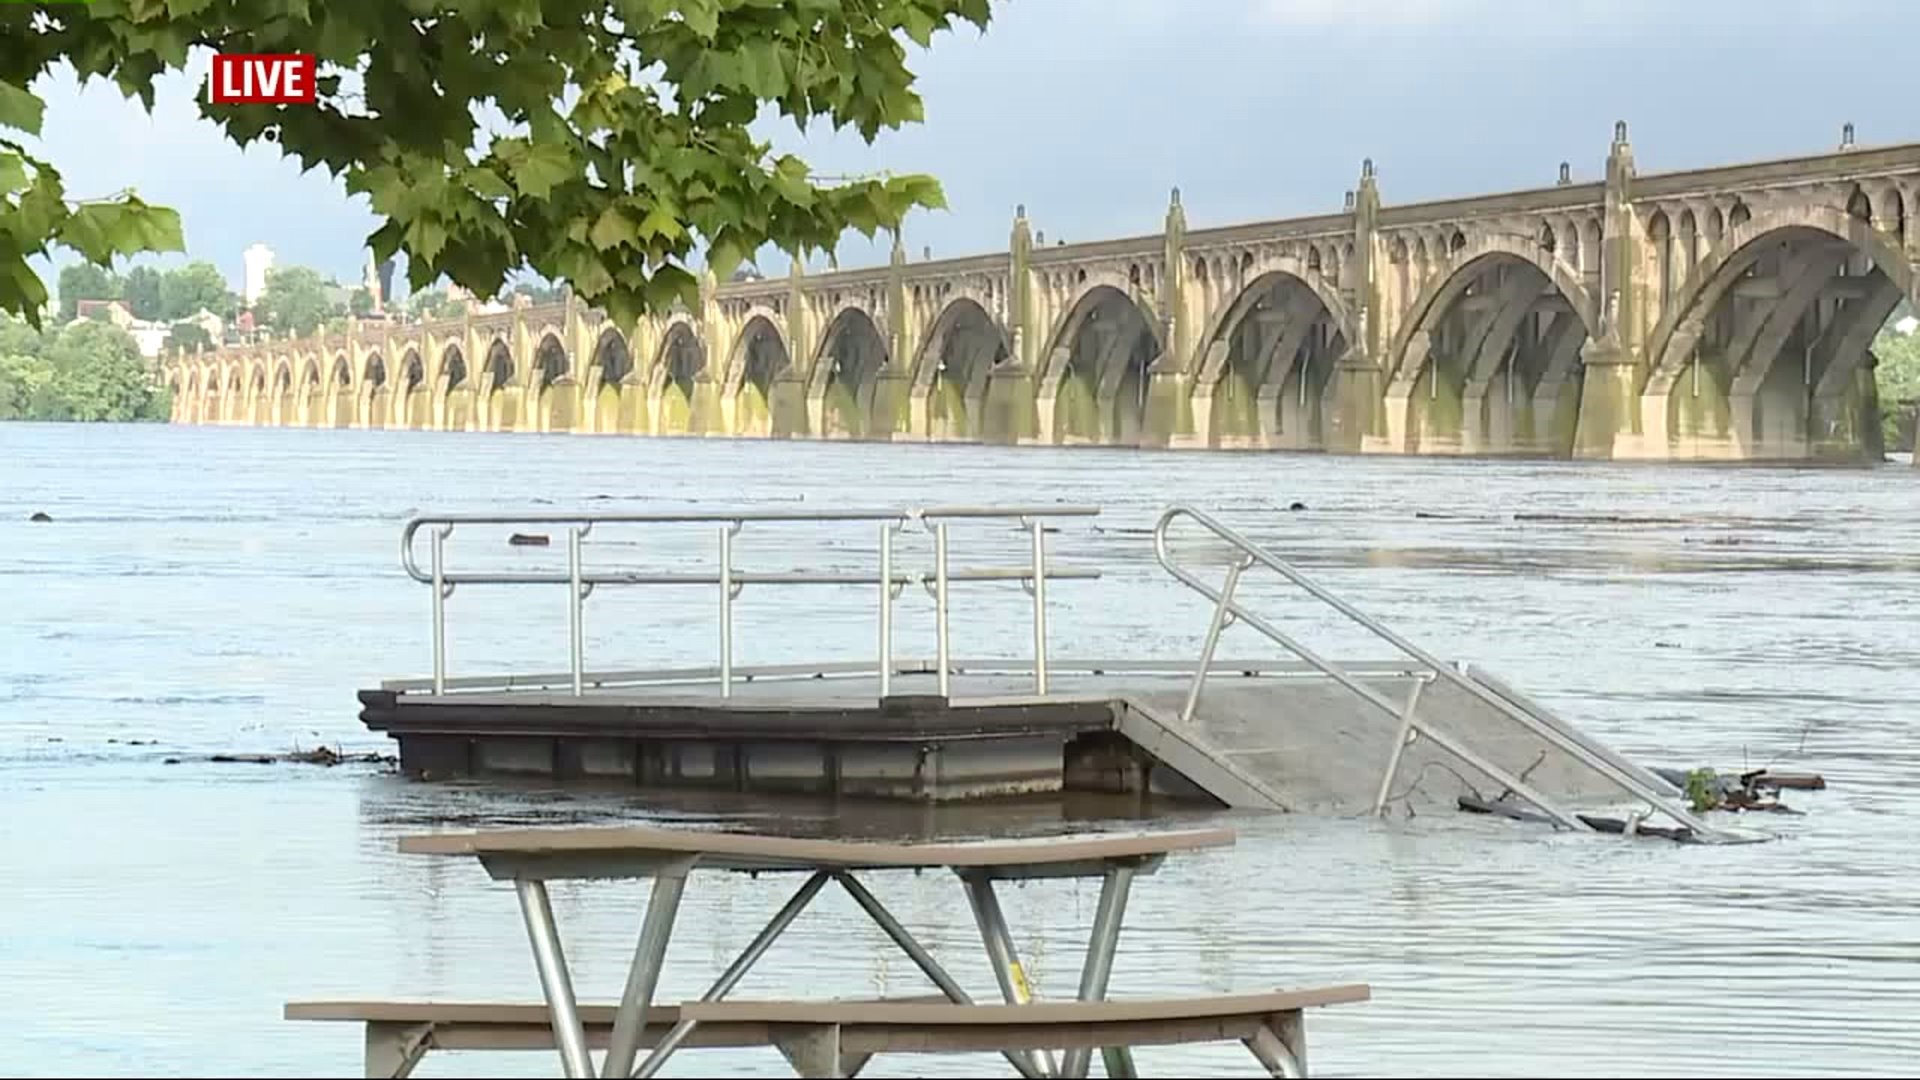 Susquehanna River levels continue to rise